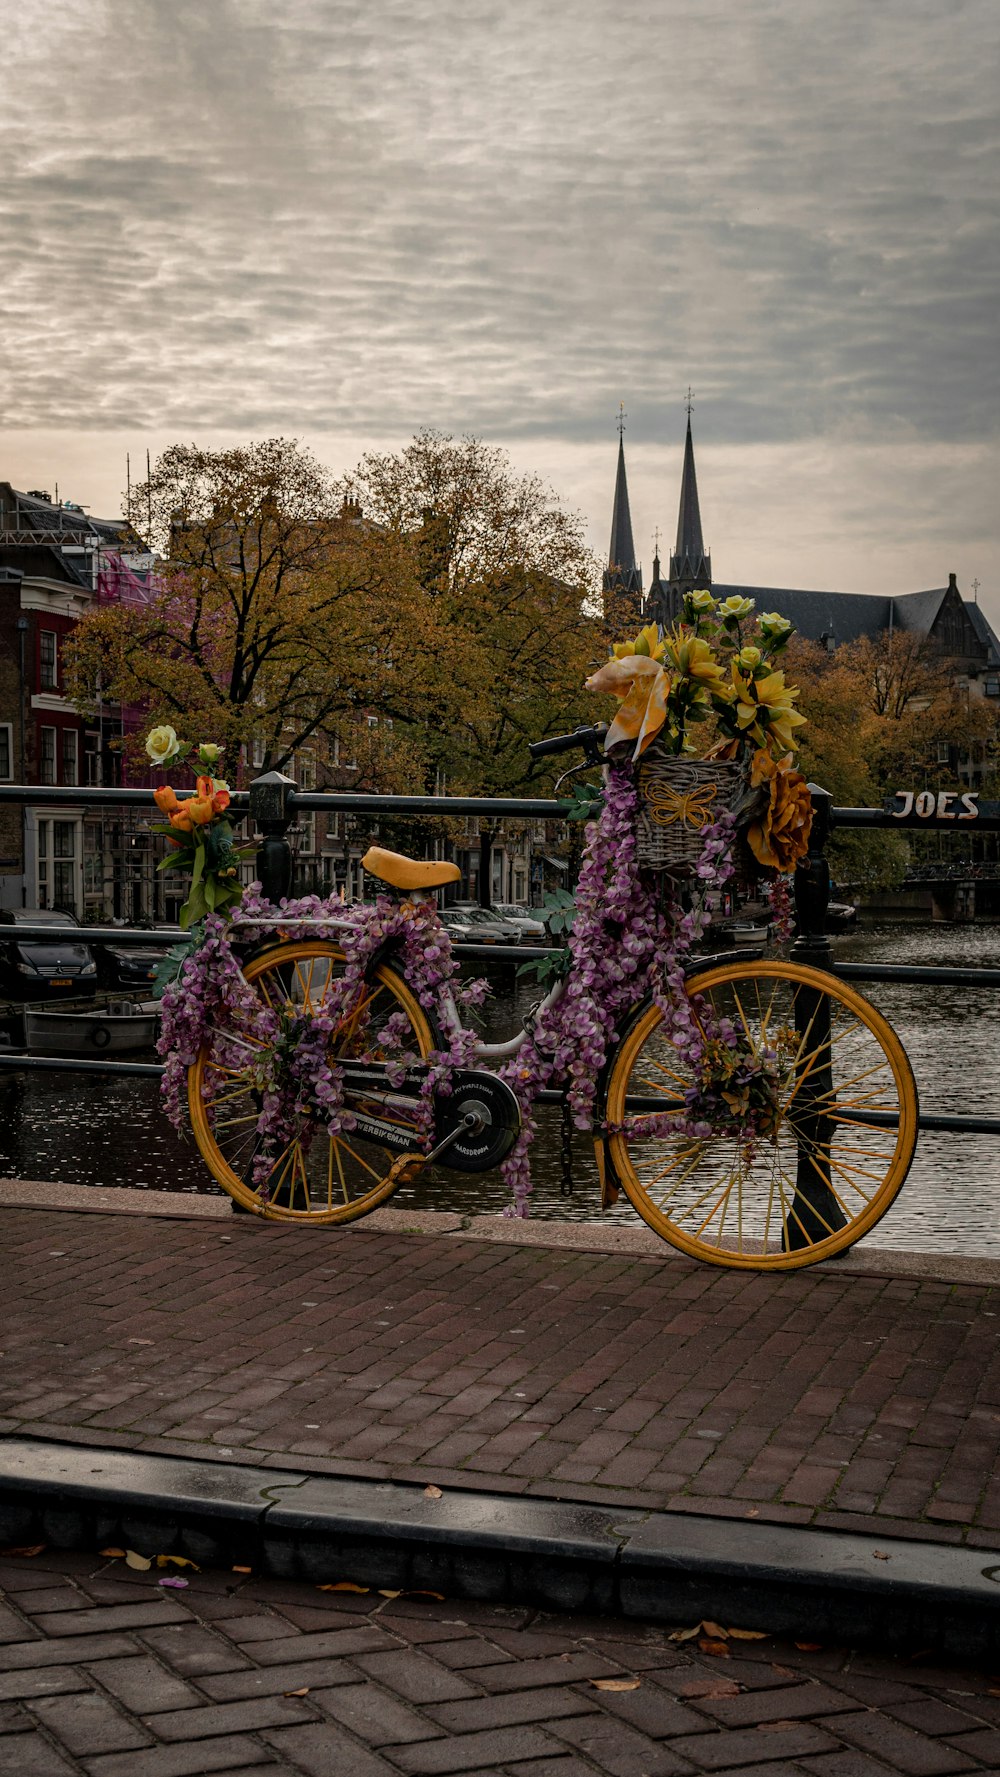 a yellow bicycle with flowers on it parked next to a river